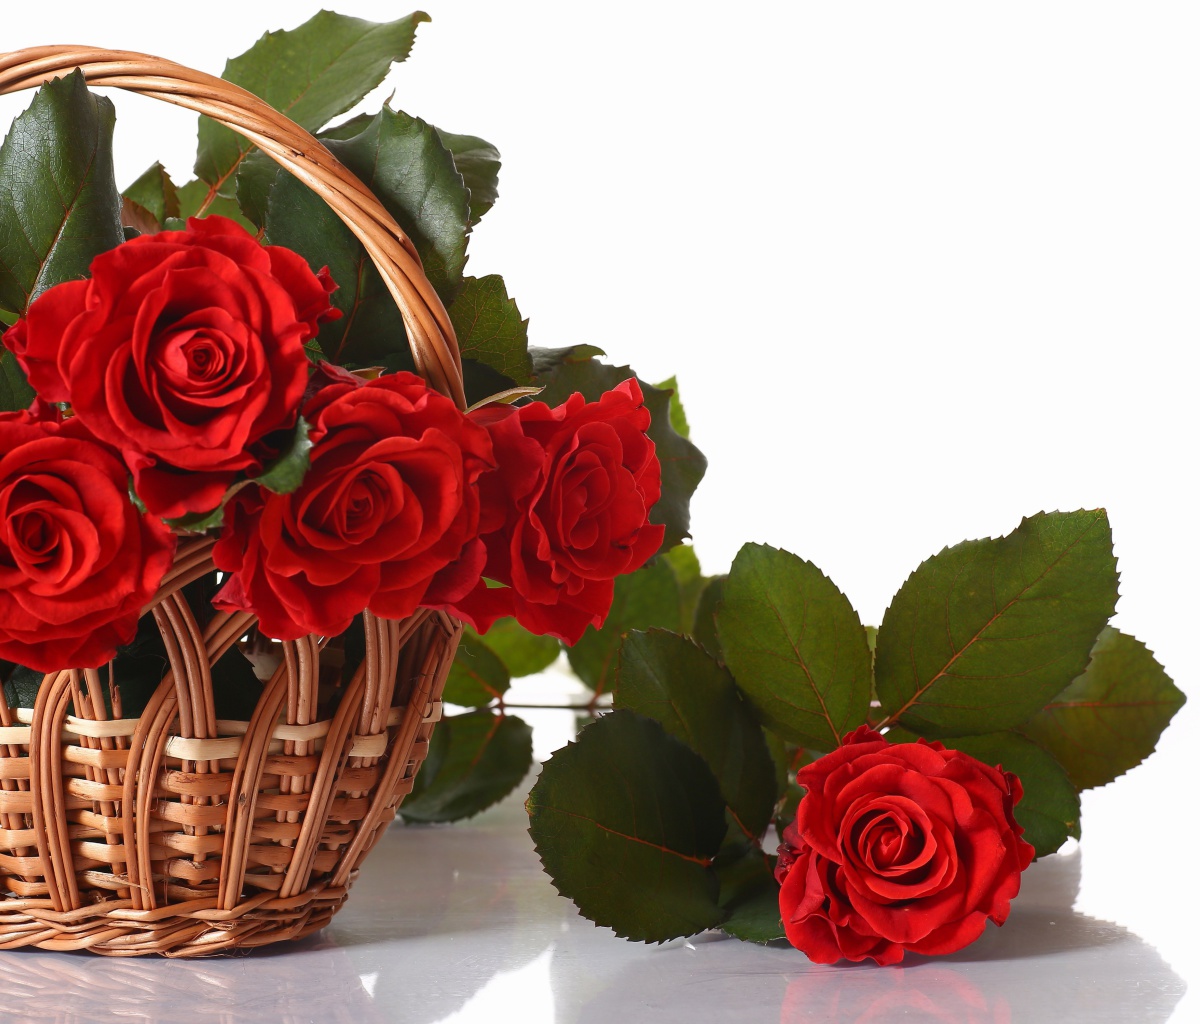 Das Basket with Roses Wallpaper 1200x1024